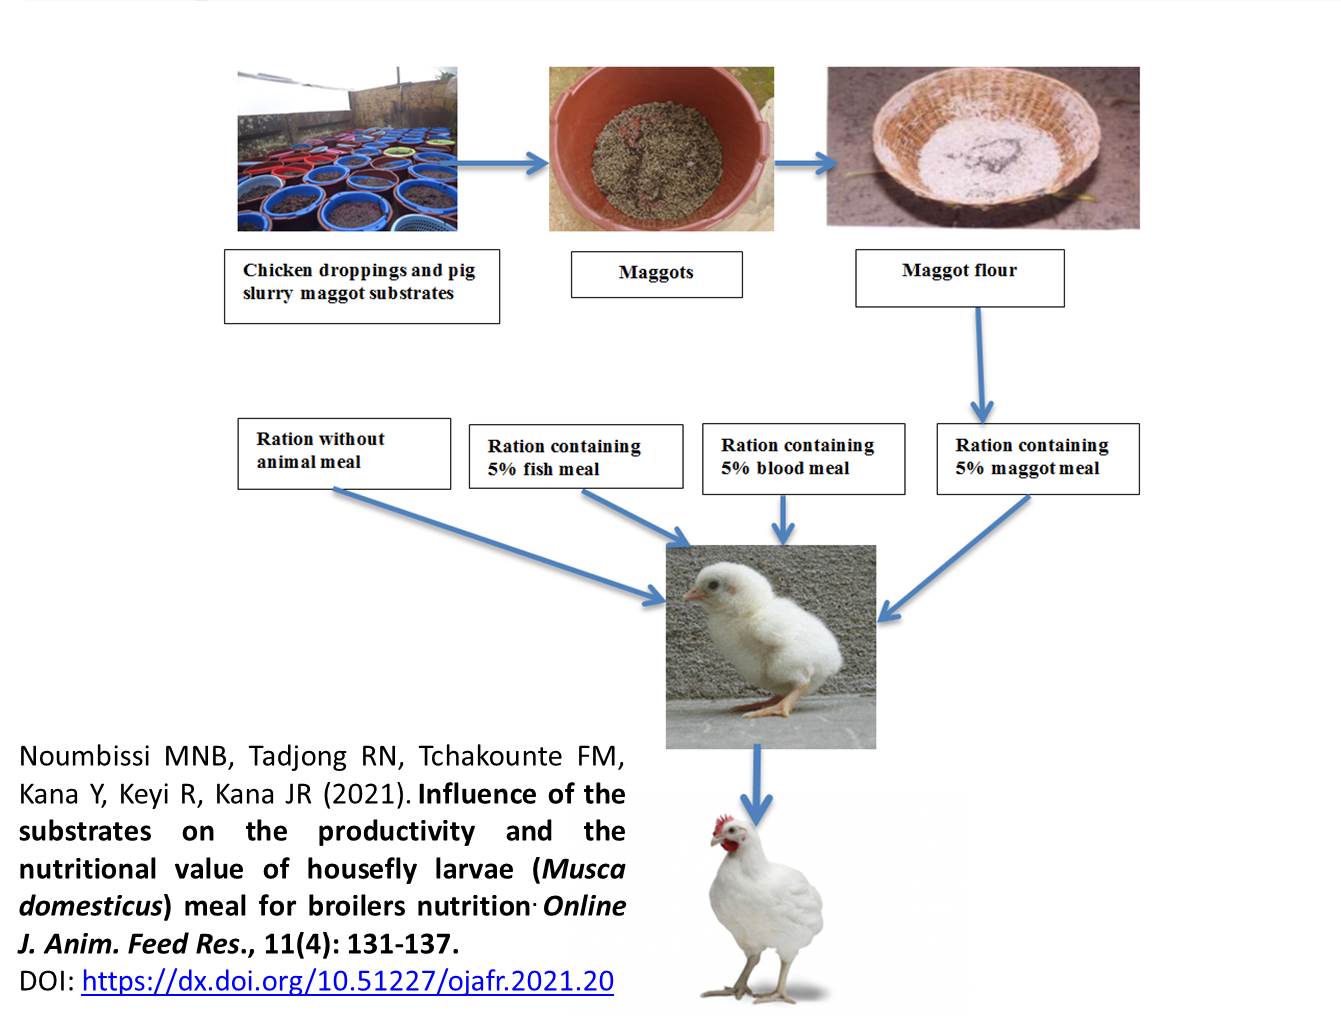 29-housefly_larvae_Musca_domesticus_meal_for_broilers_nutrition